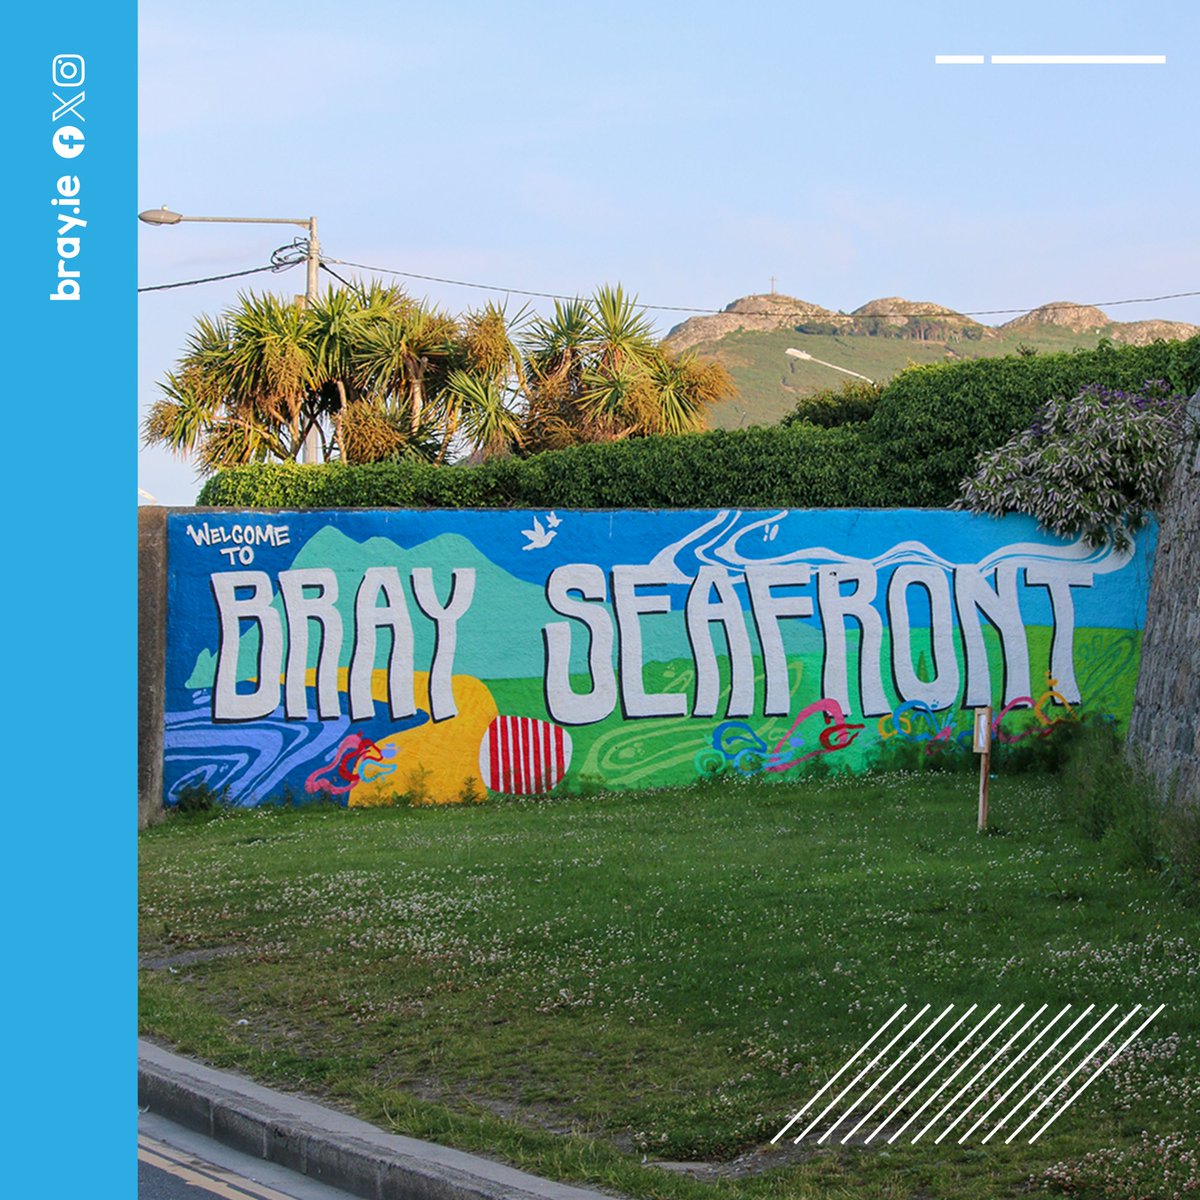 #Bray is packed full of incredible experiences that you can’t get anywhere else so why not make a break for Bray this summer? Plan your summer getaway ➜ bray.ie/seedo/

#SummerInBray #LoveBray